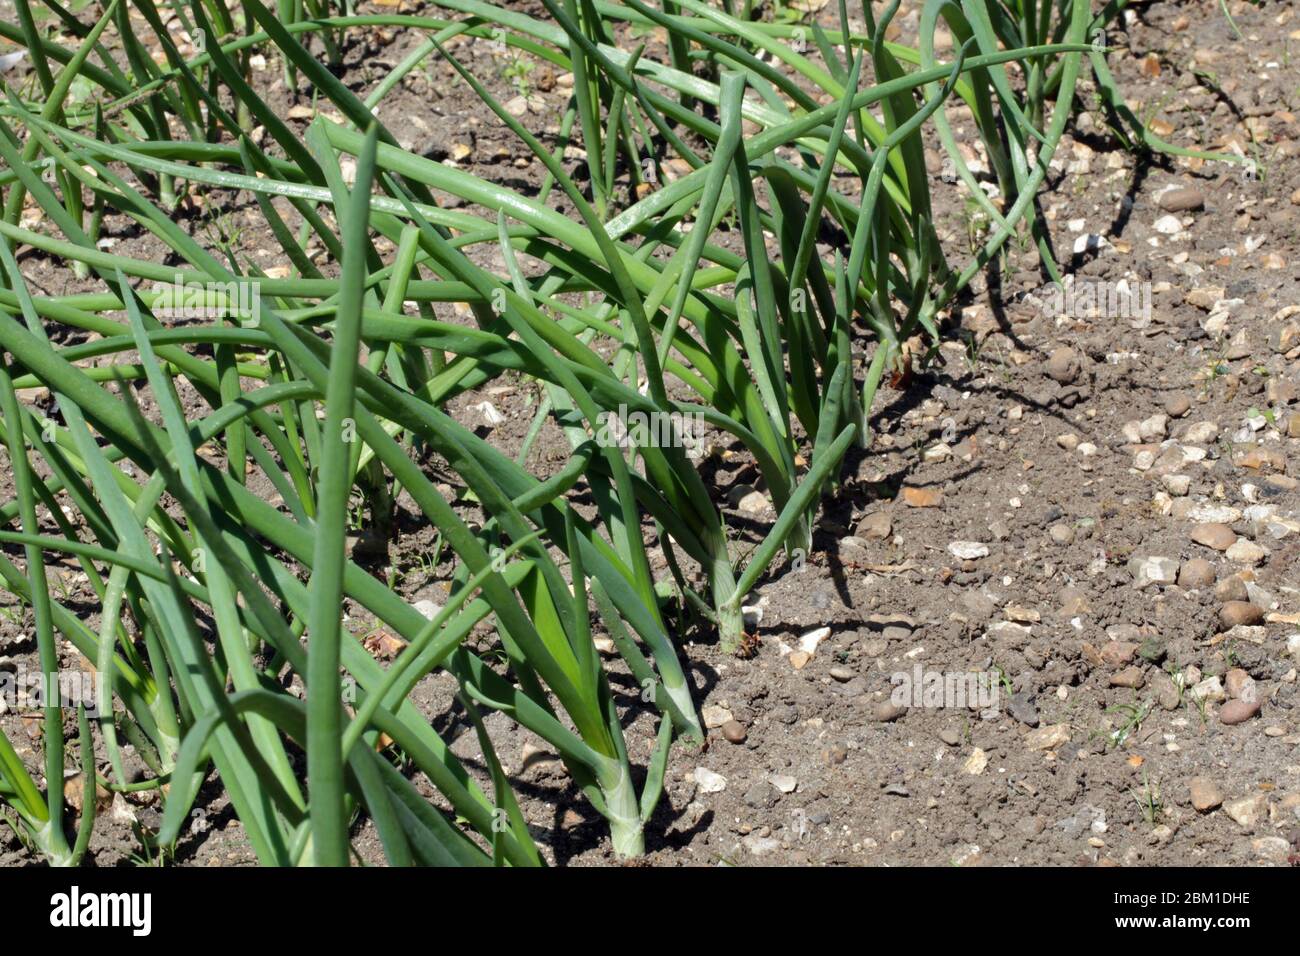 Onions growing in a vegetable garden. Stock Photo